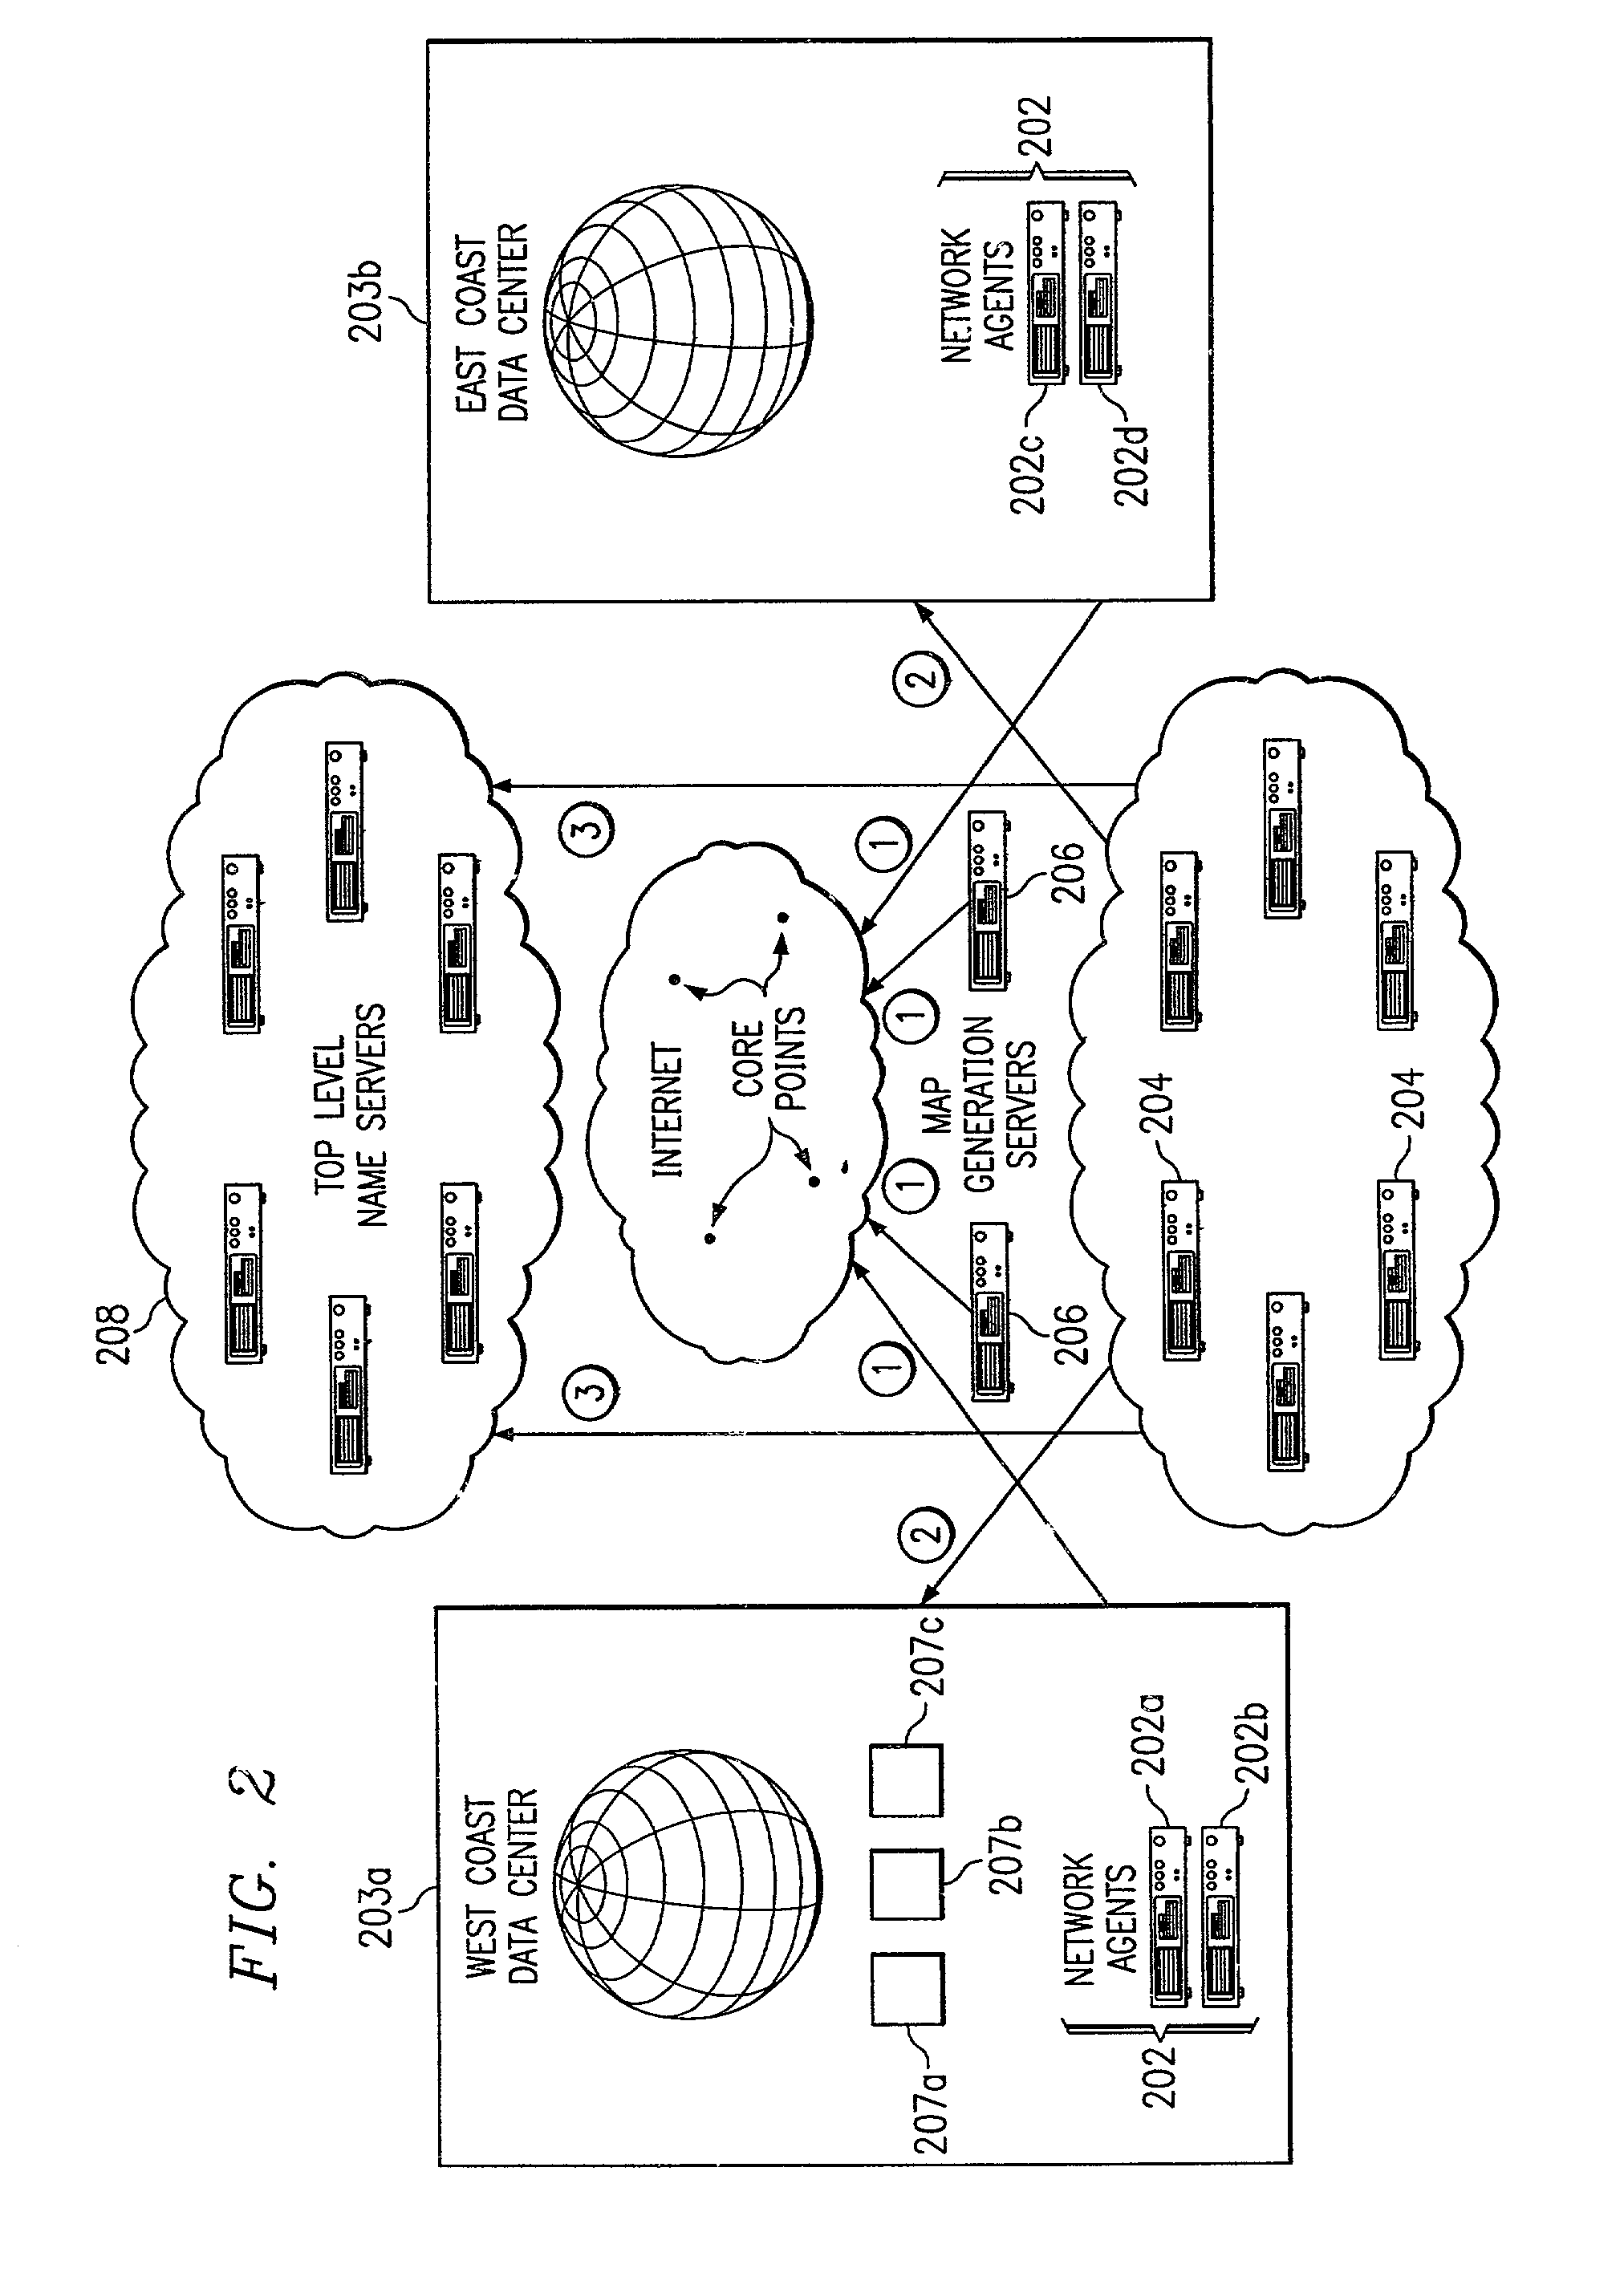 Method for extending a network map